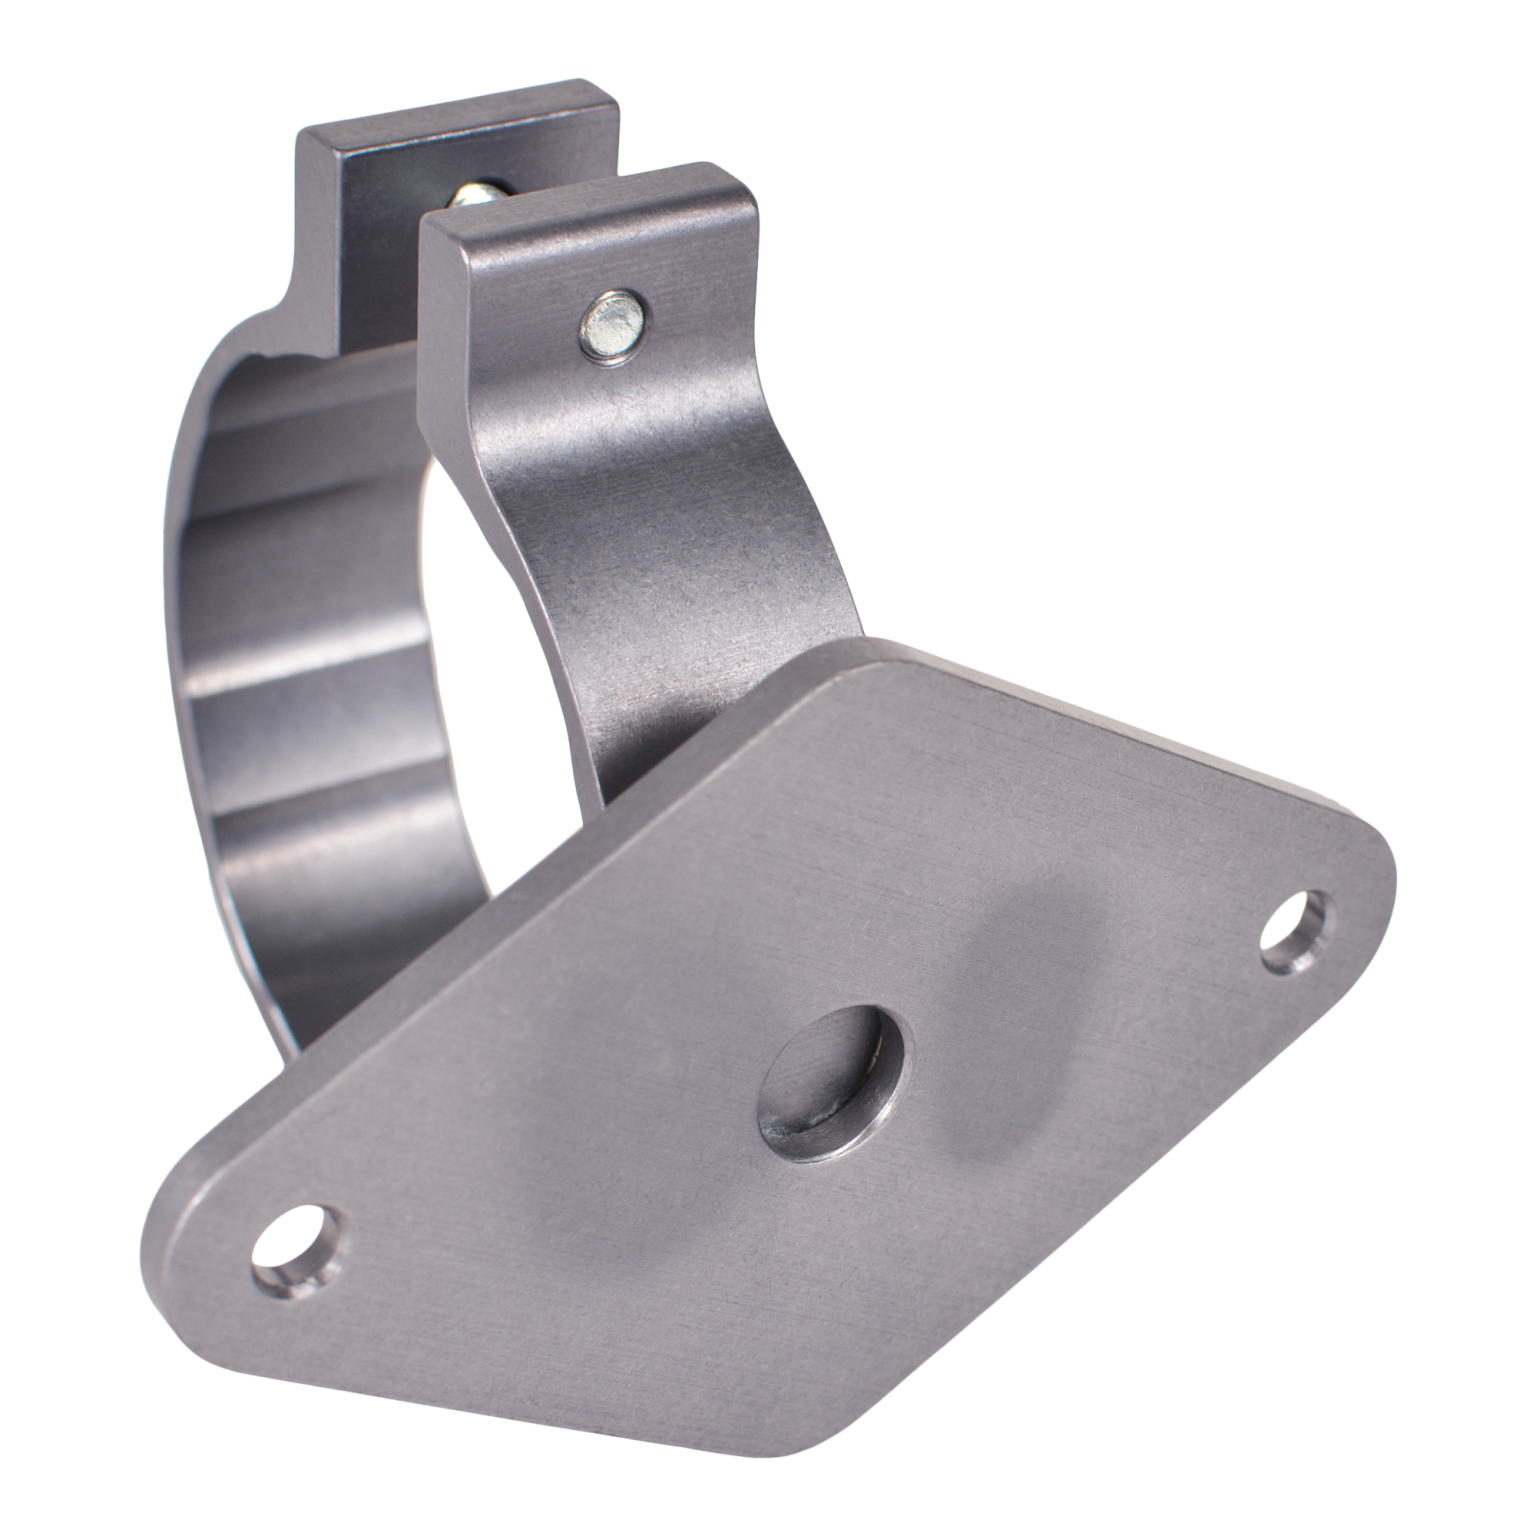 JOES Panel Mount Coil Clamp